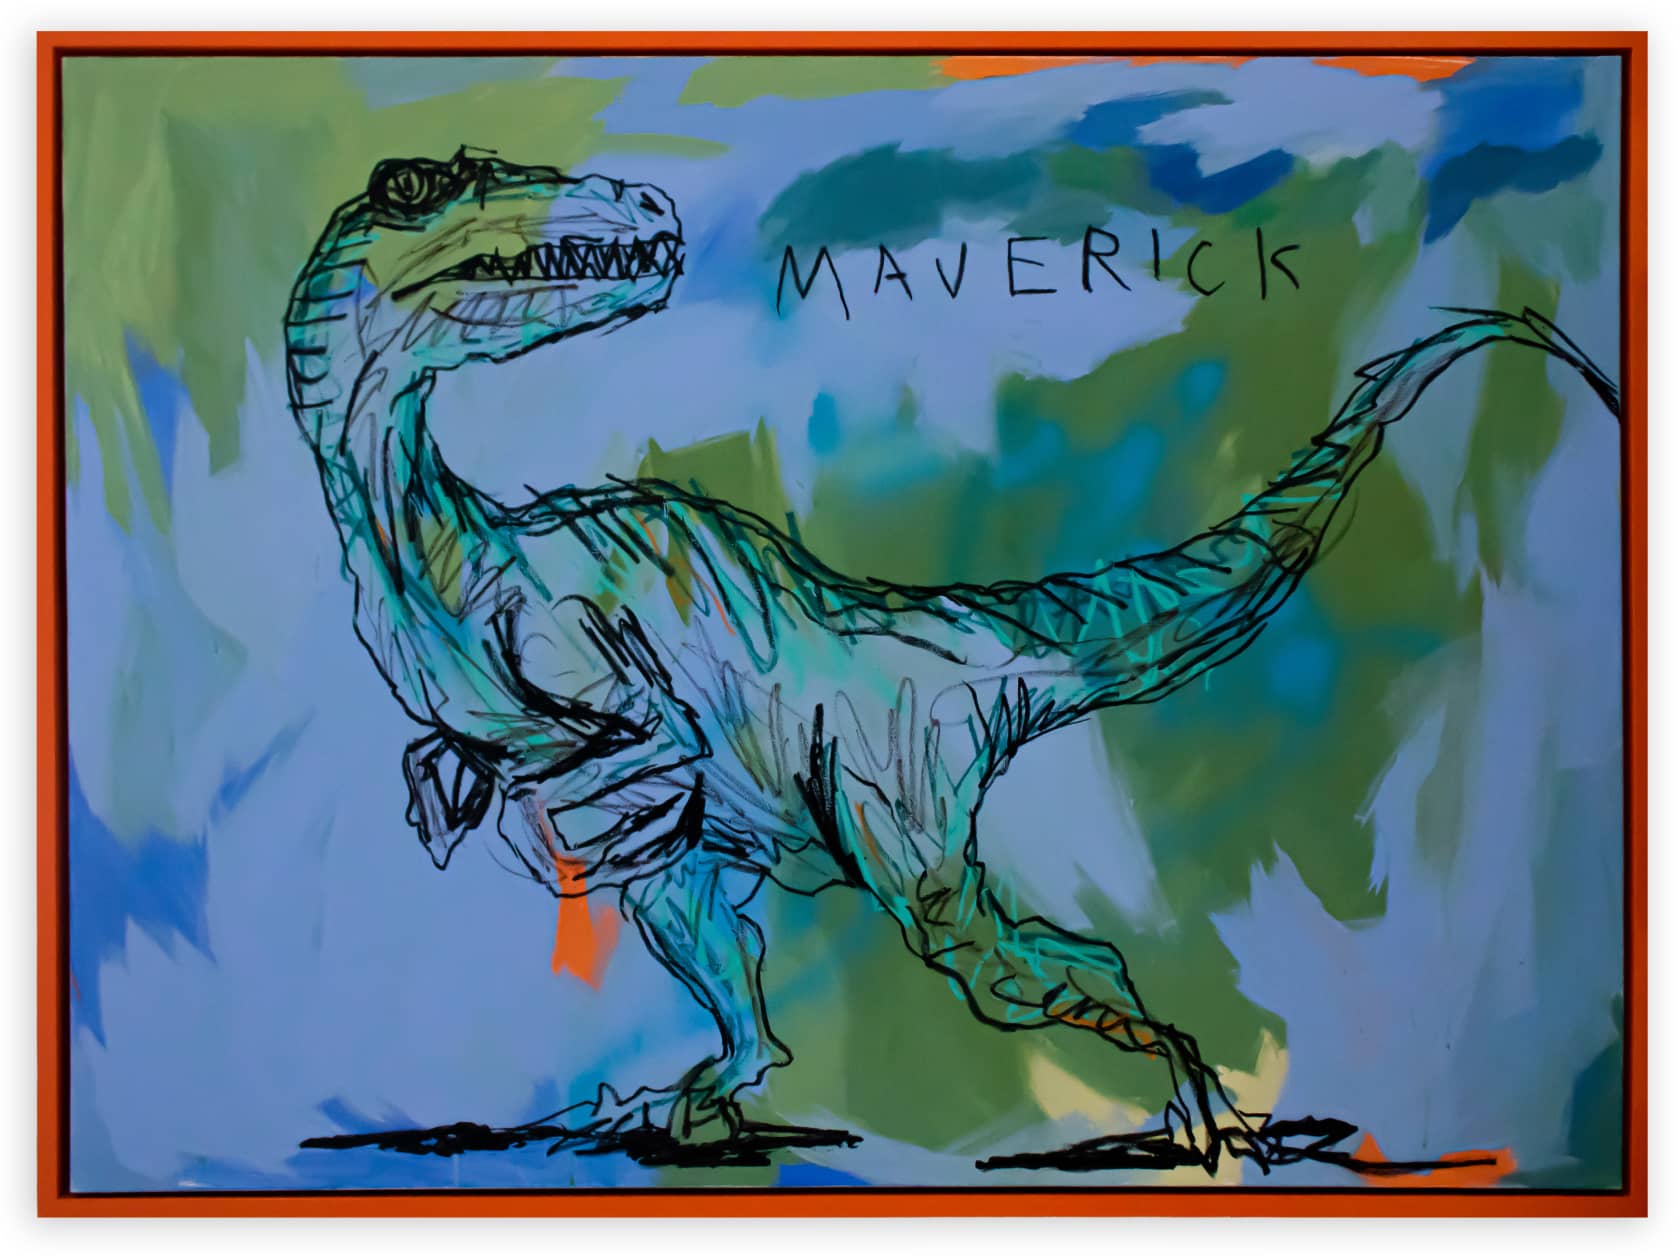 the connor brothers Maverick Acrylic and oil stick on canvas